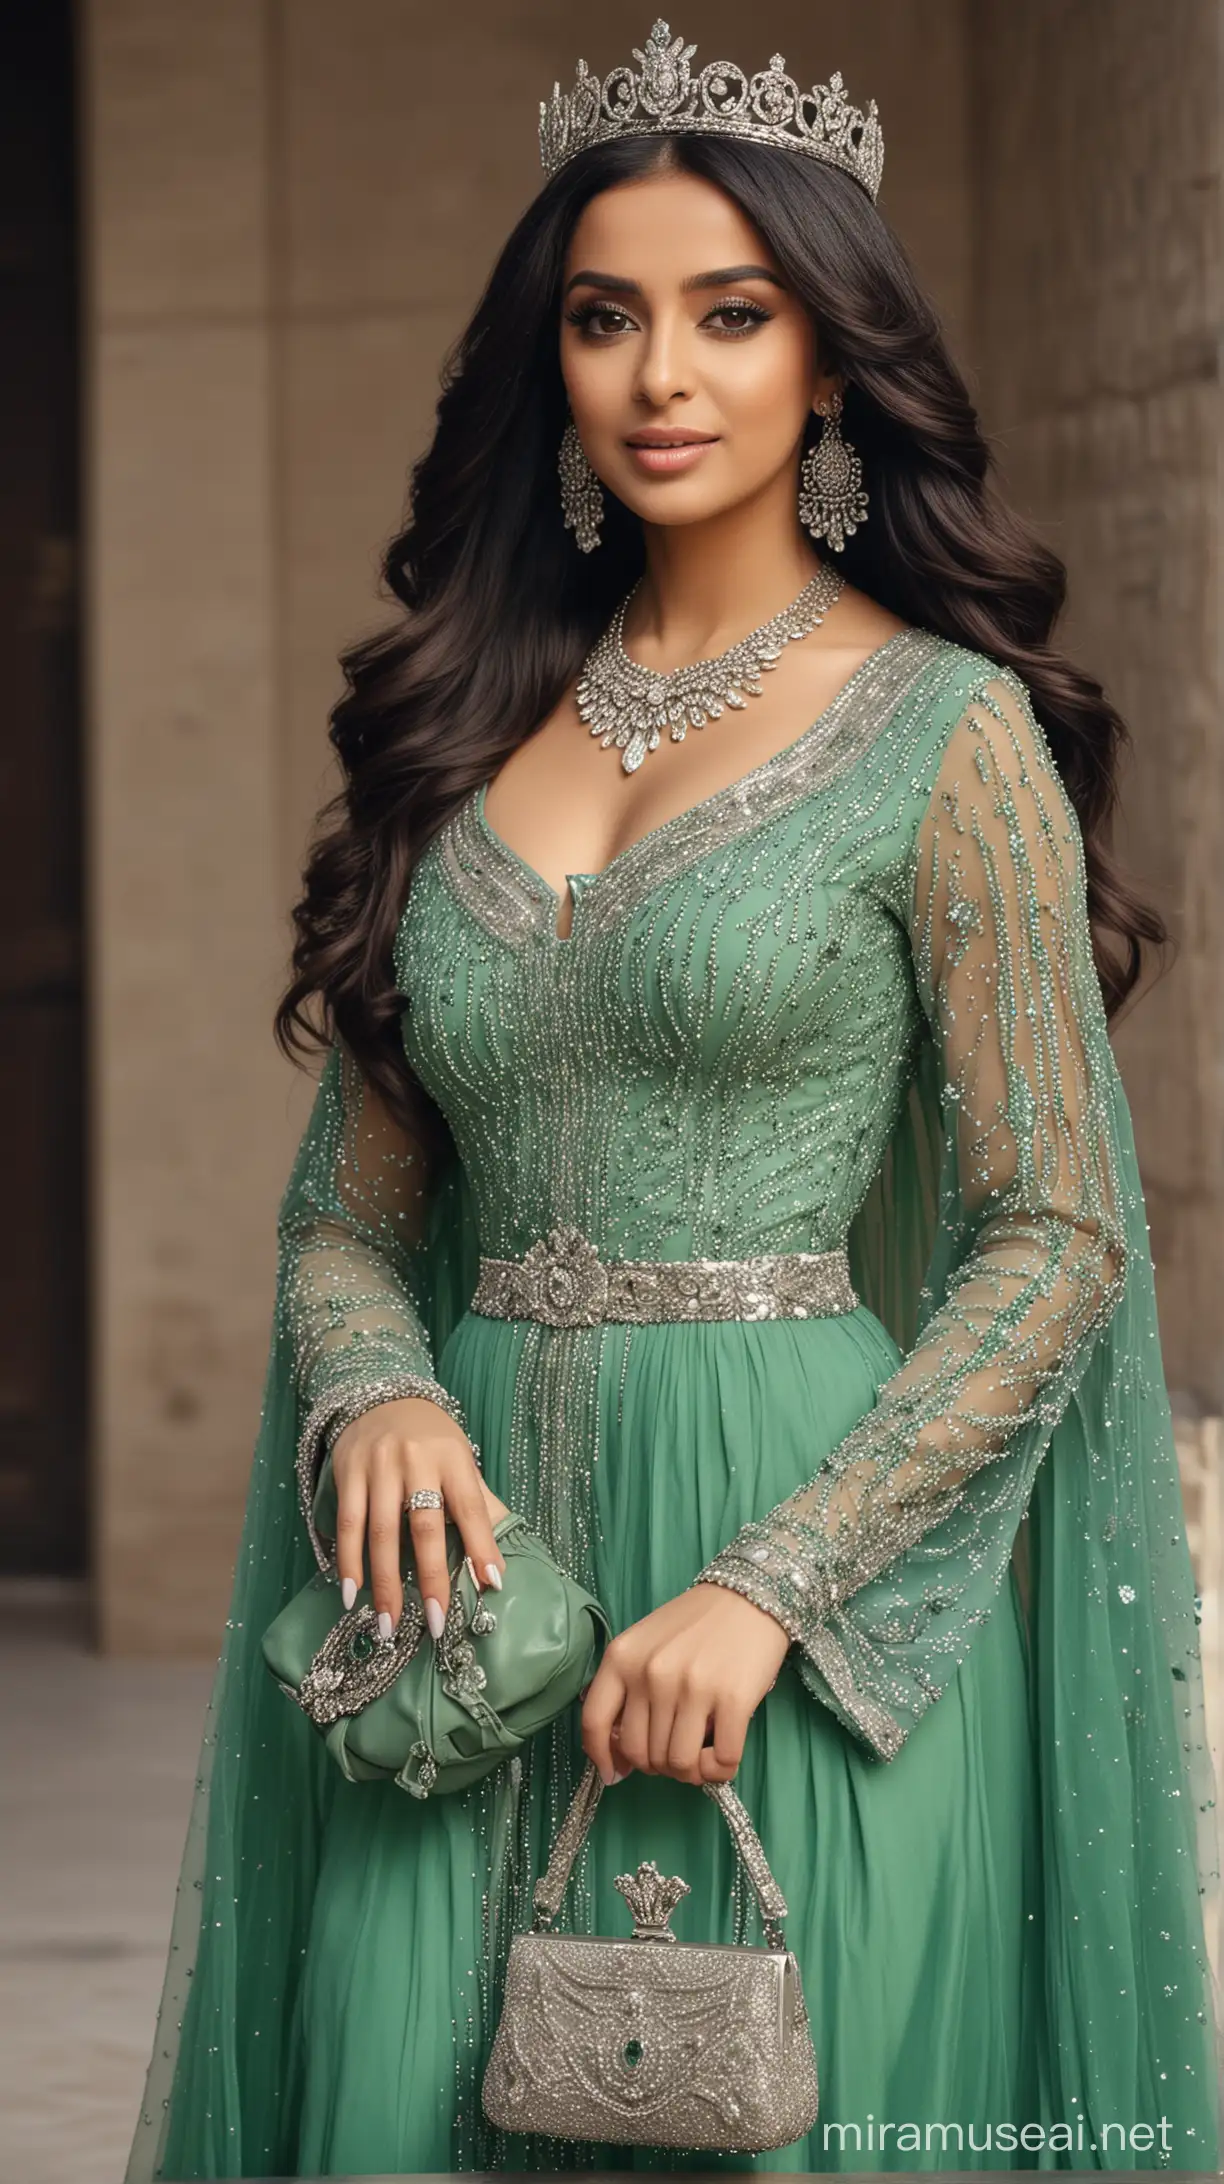 Regal Queen in Green Dress with Silver Accessories